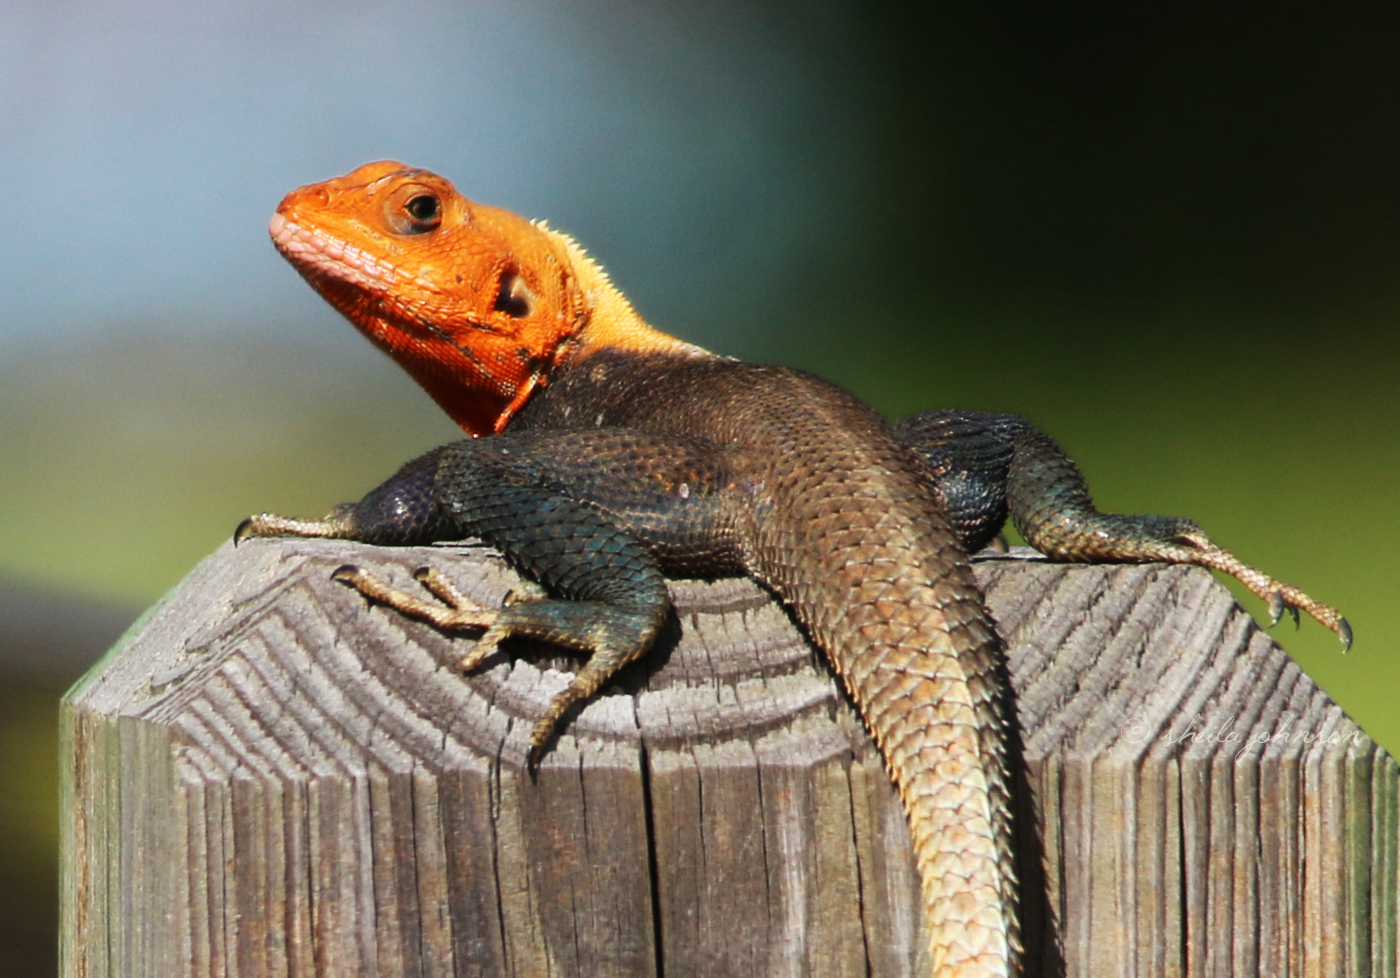 The Agama Lizard (Aka Rainbow Lizard) Is Invasive To South Florida, And, Sadly, Eats Native Anole Lizards. They Are, However, Interesting To Watch And Display The Most Amazing Coloring.